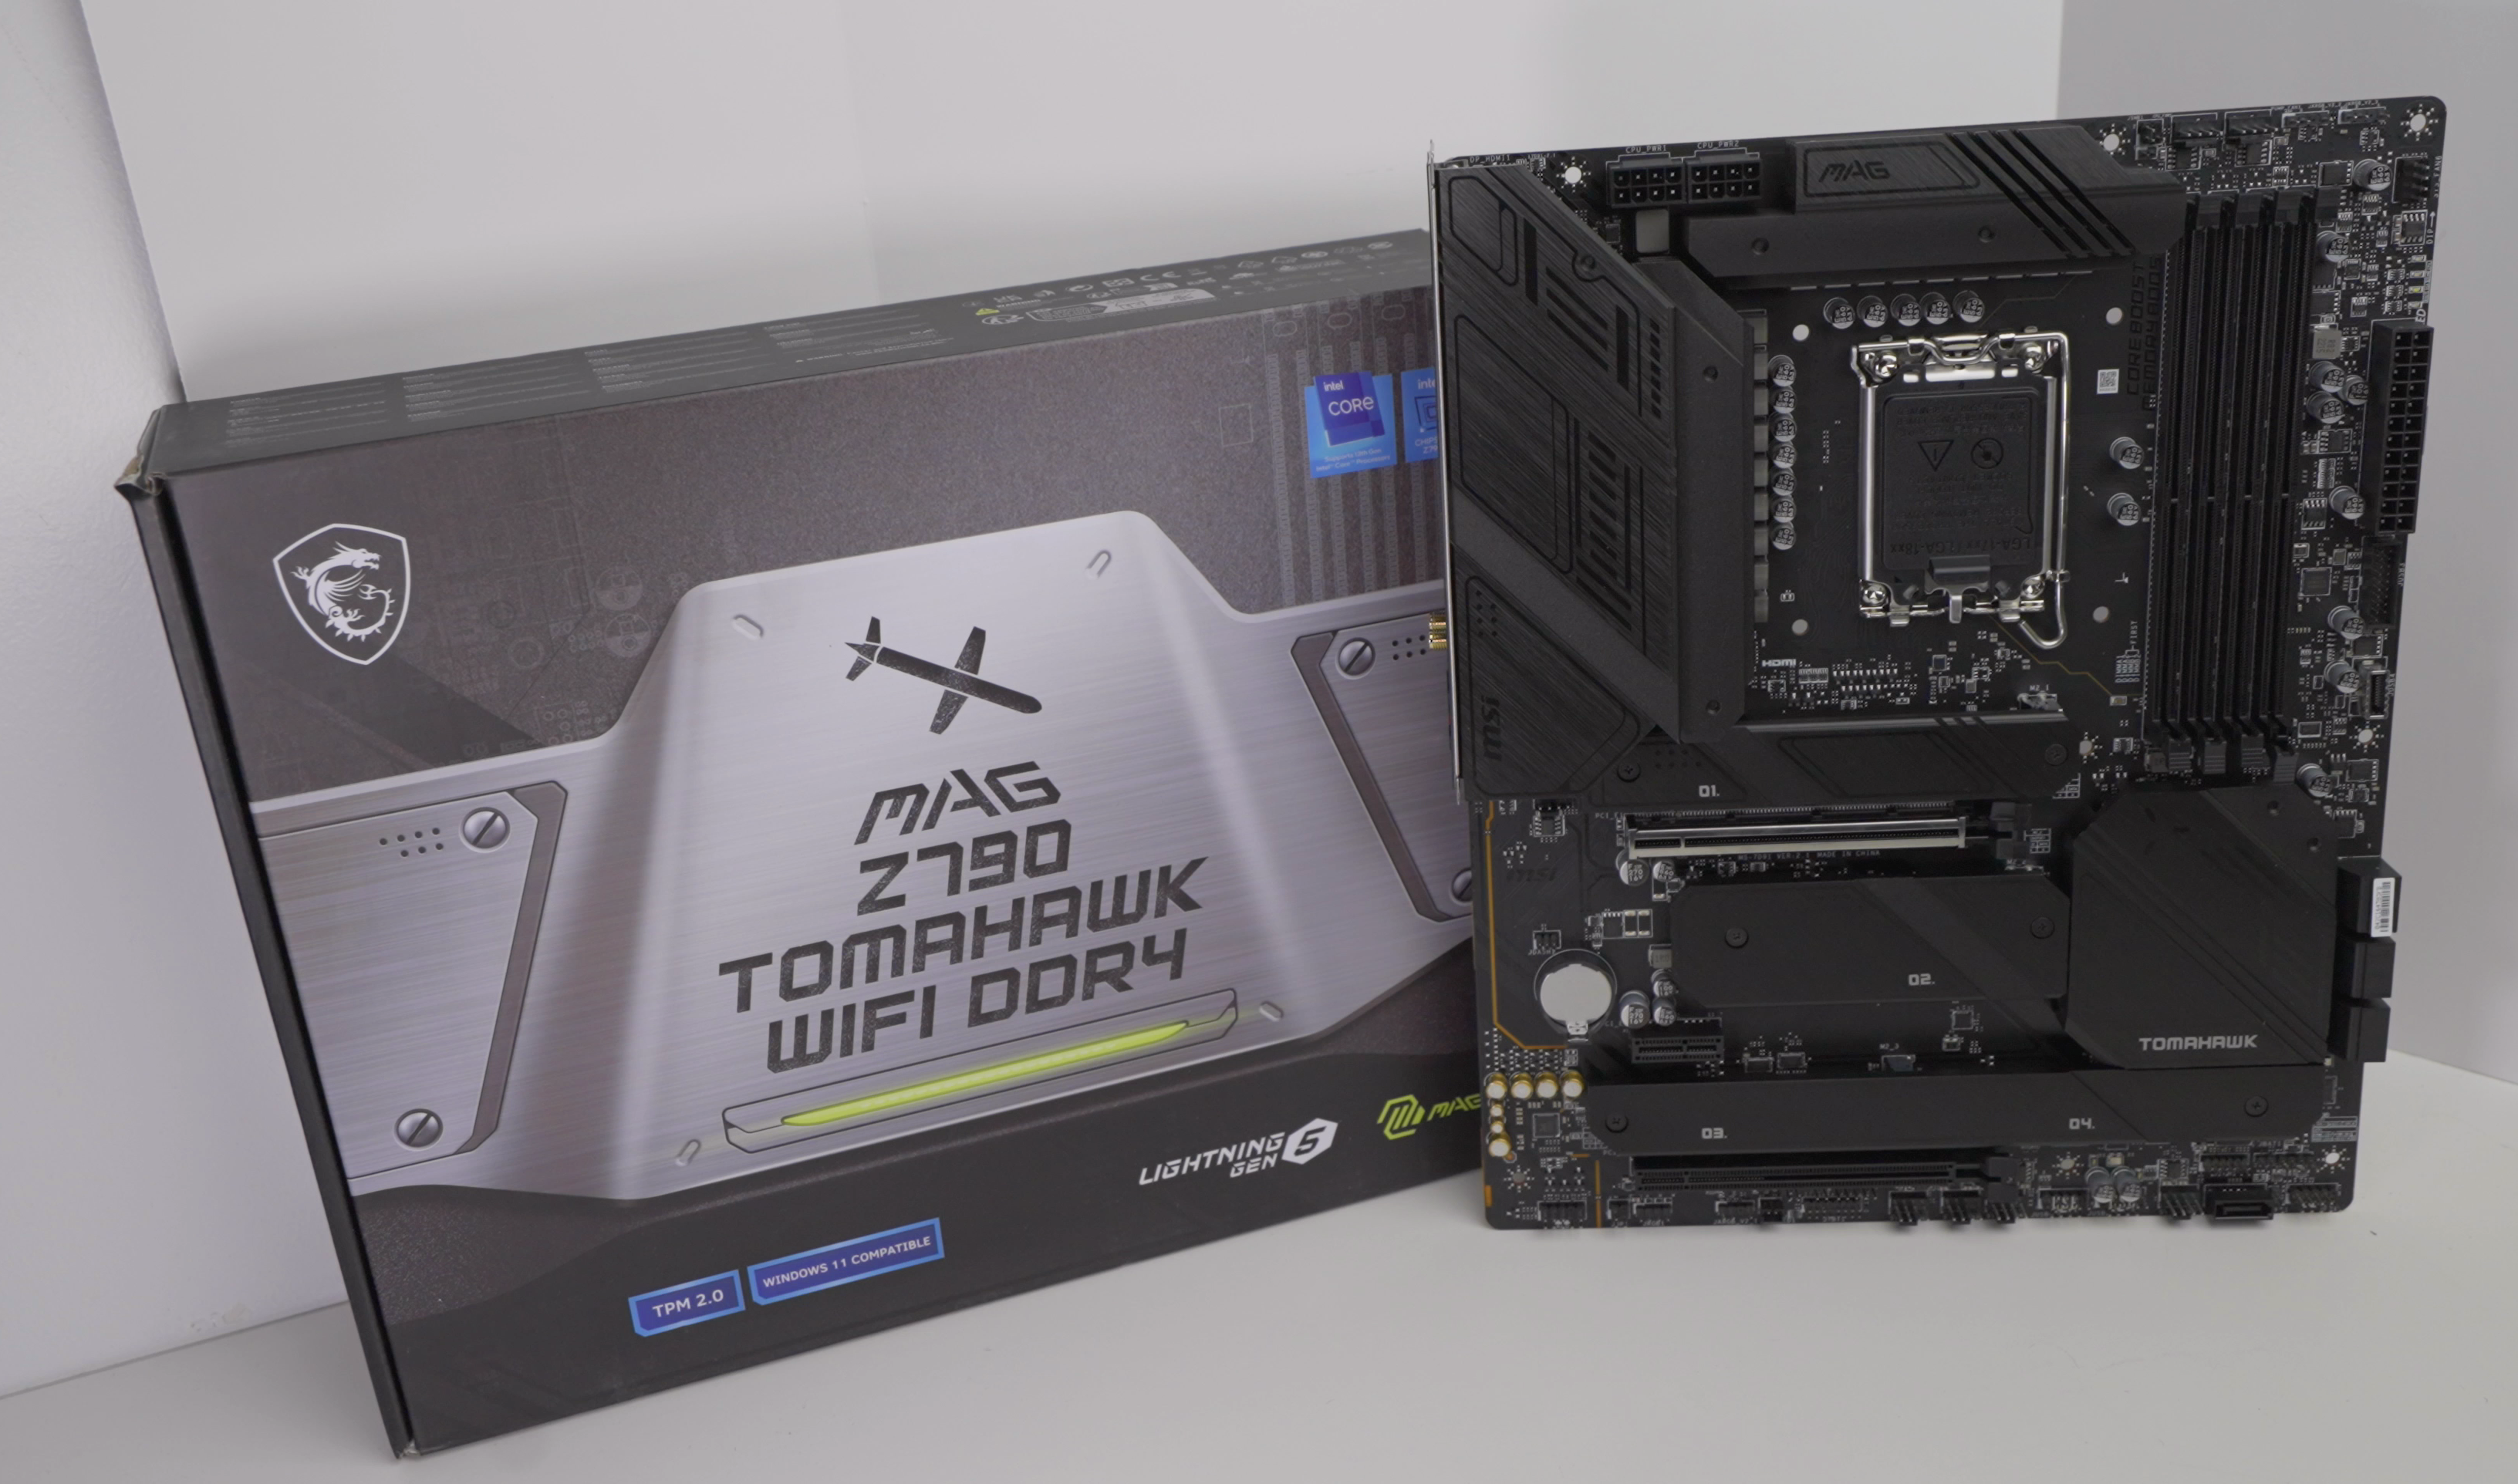 MSI MAG Z790 Tomahawk WiFi DDR4 - Best bang-for-the-buck Intel gaming motherboard